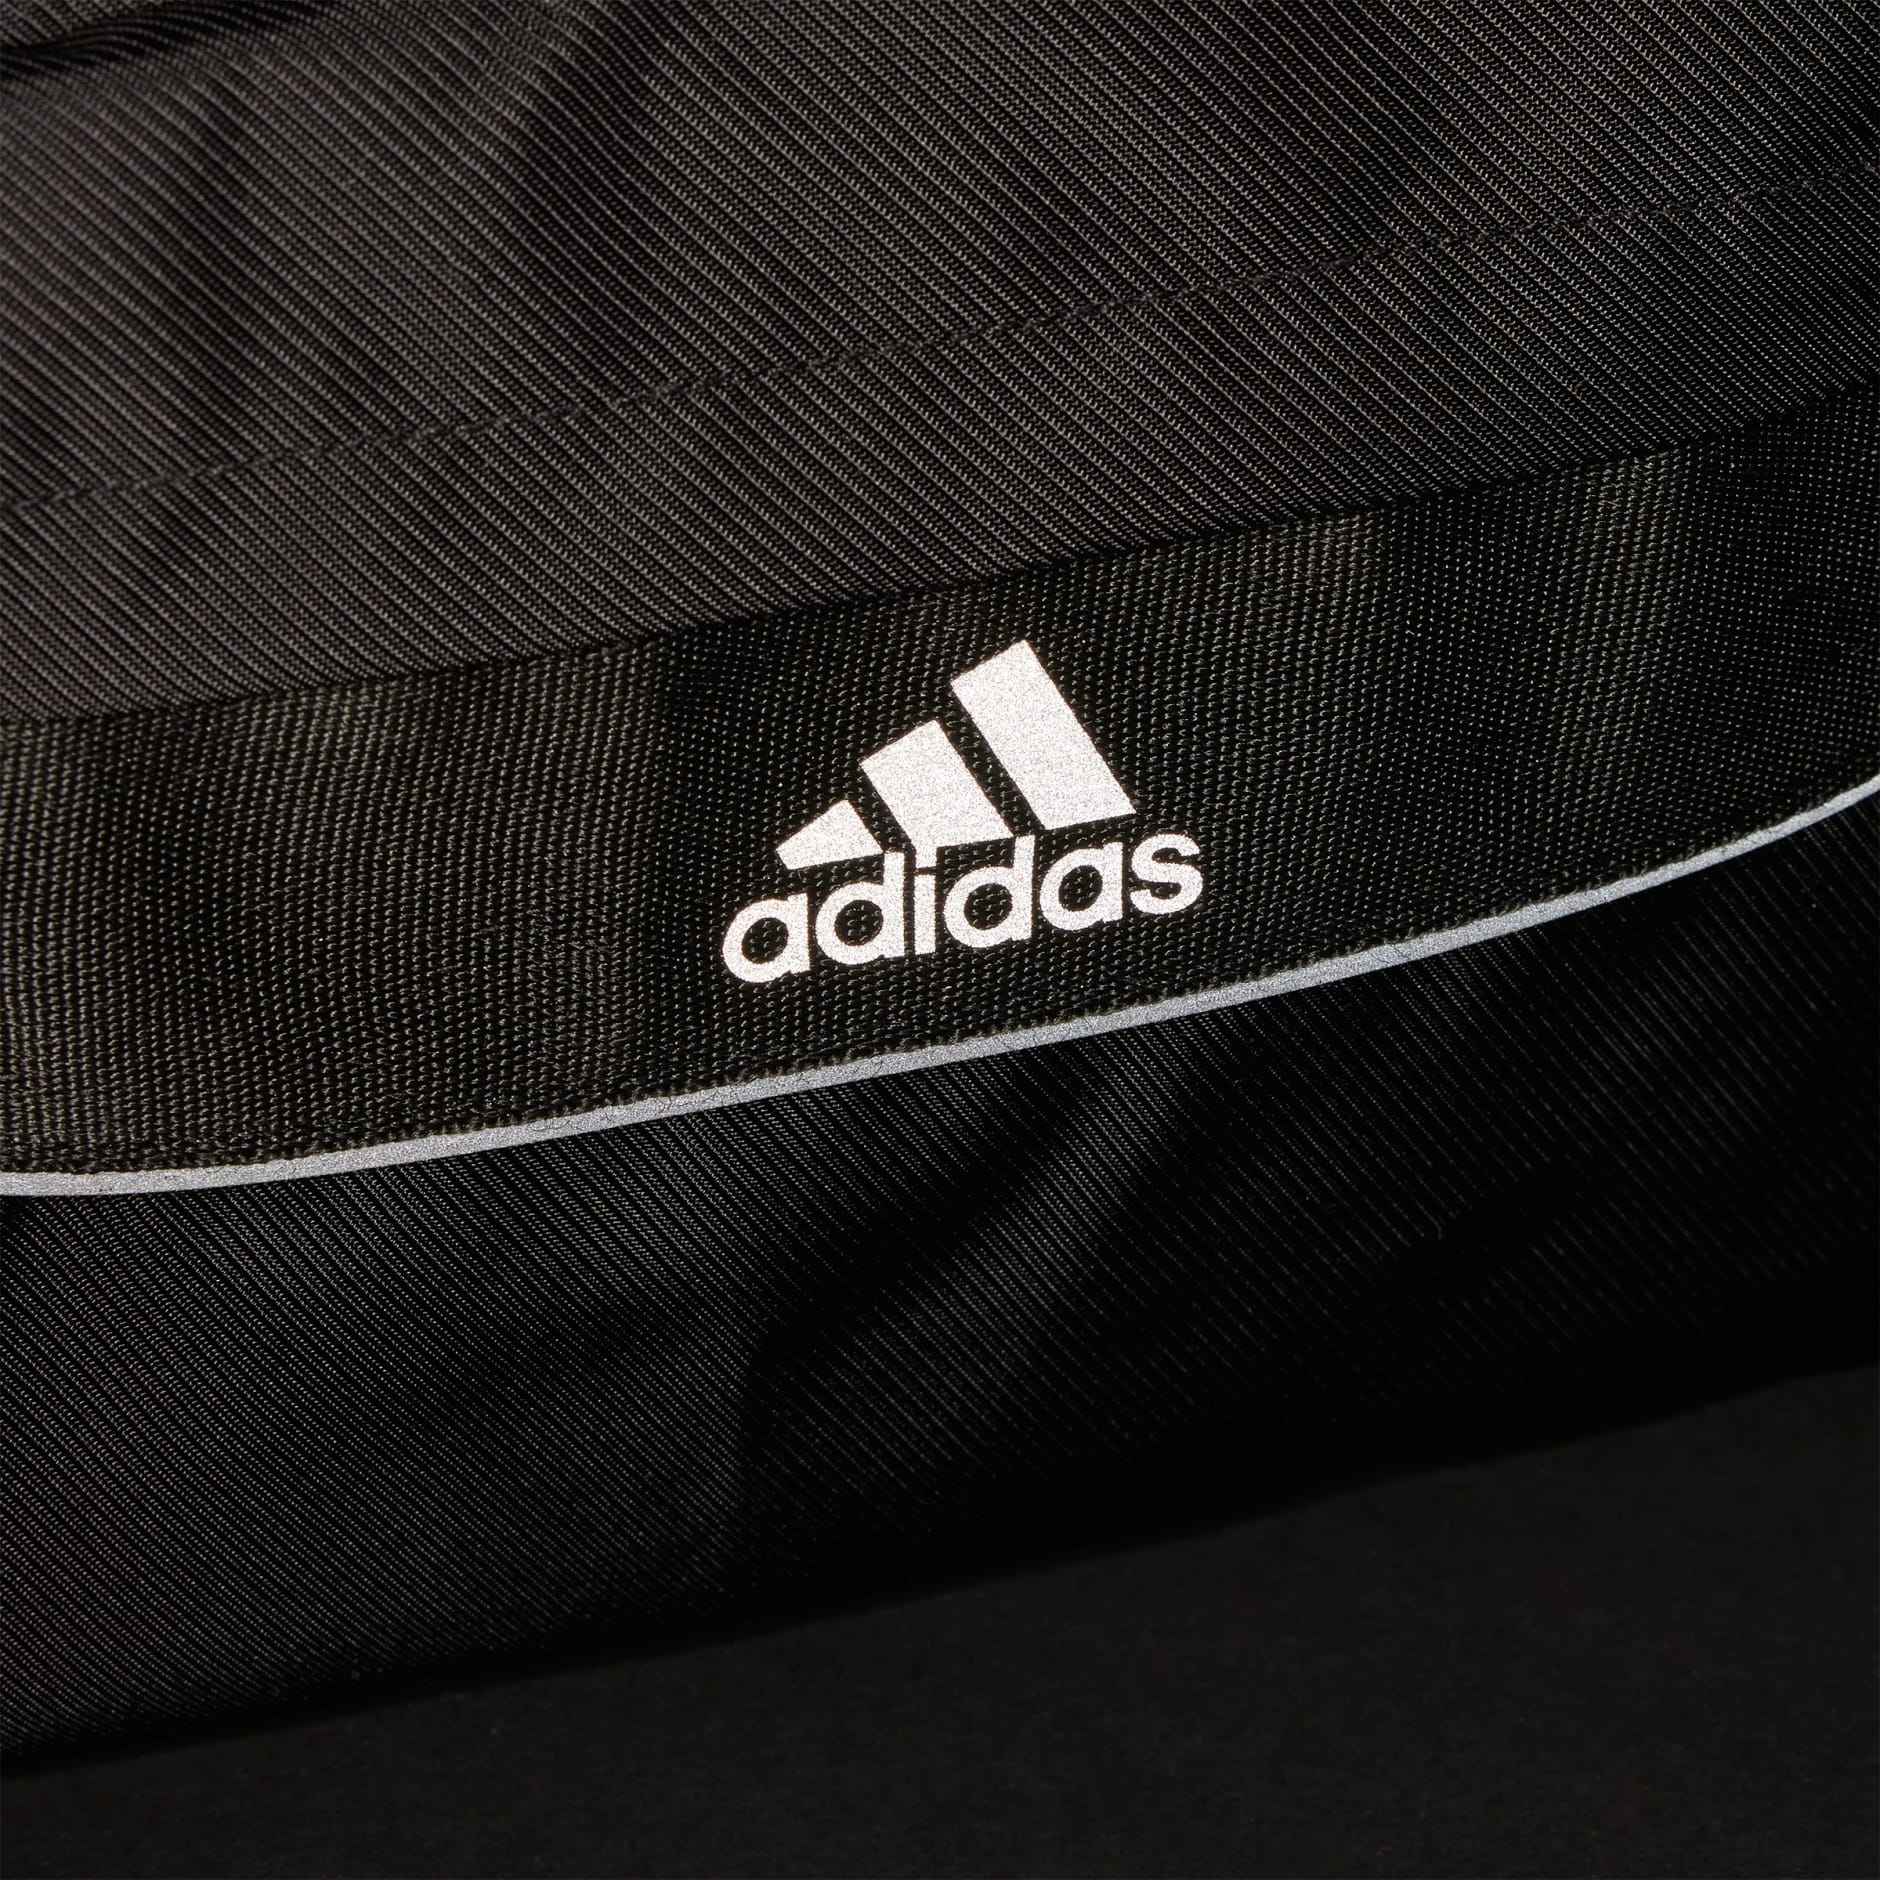 Accessories - Back To School Premium Backpack - Black | adidas Egypt